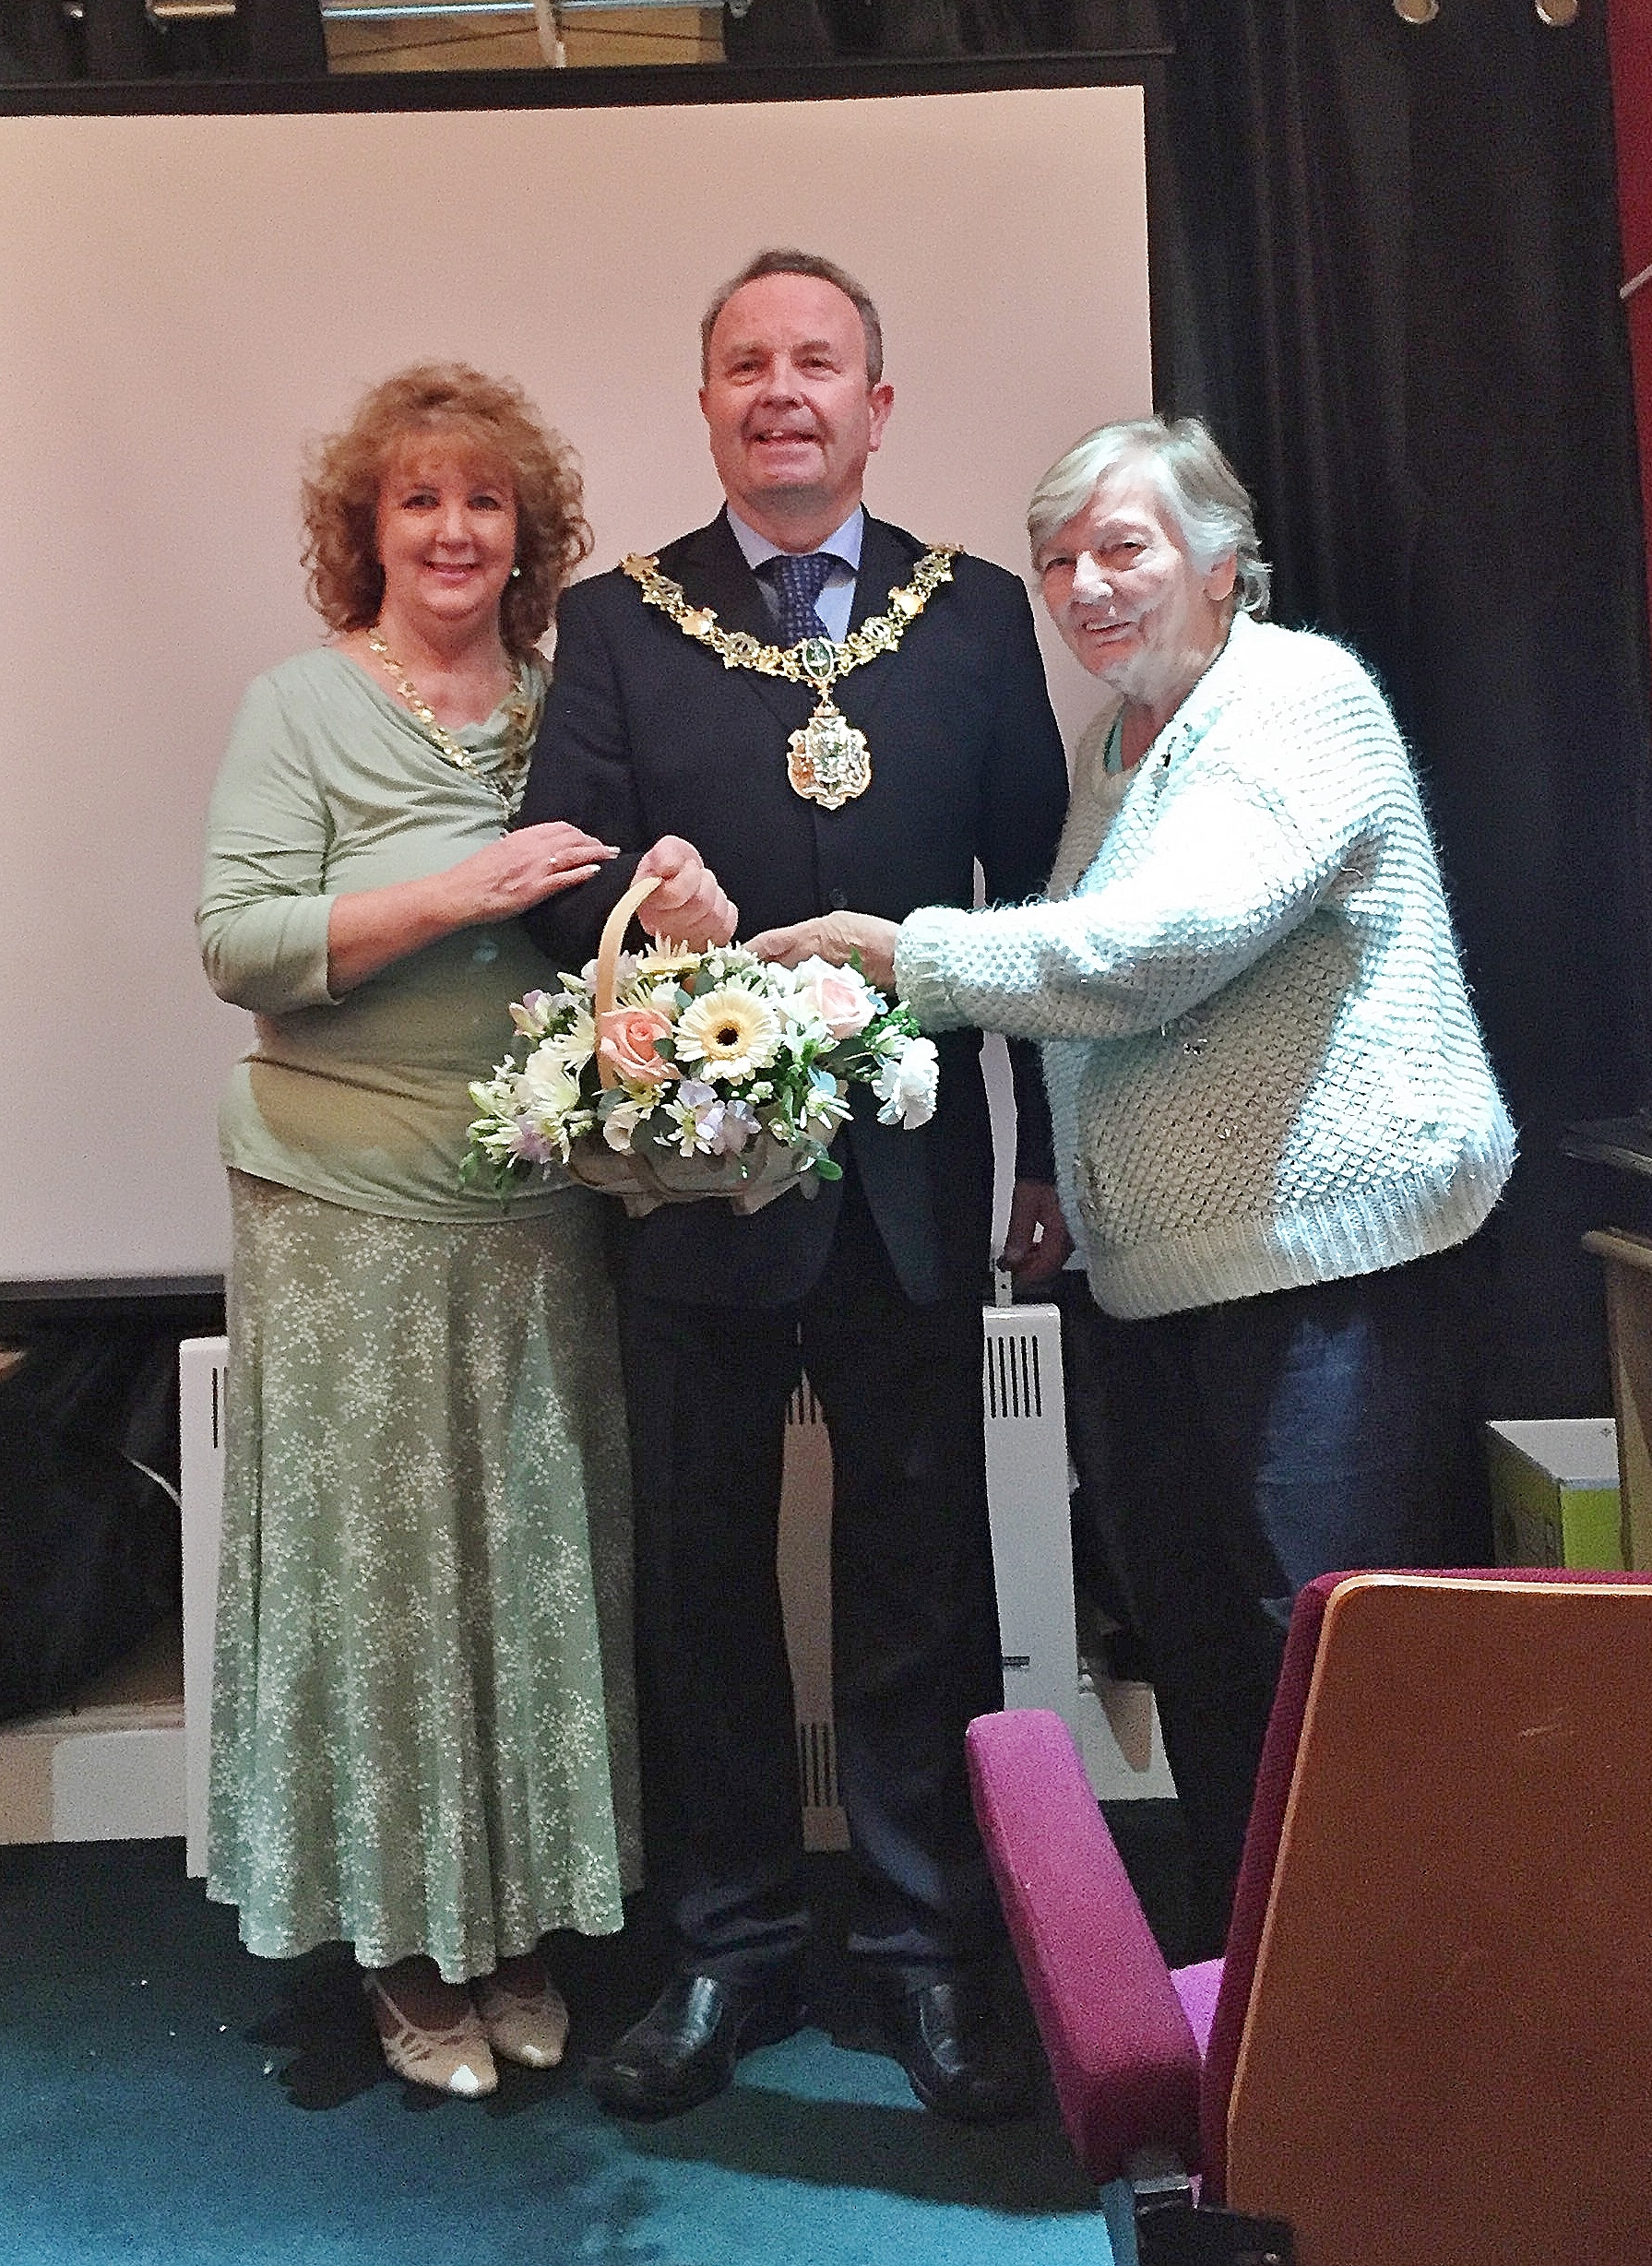 Former Birkenhead Mayoress honoured for her service to Wirral